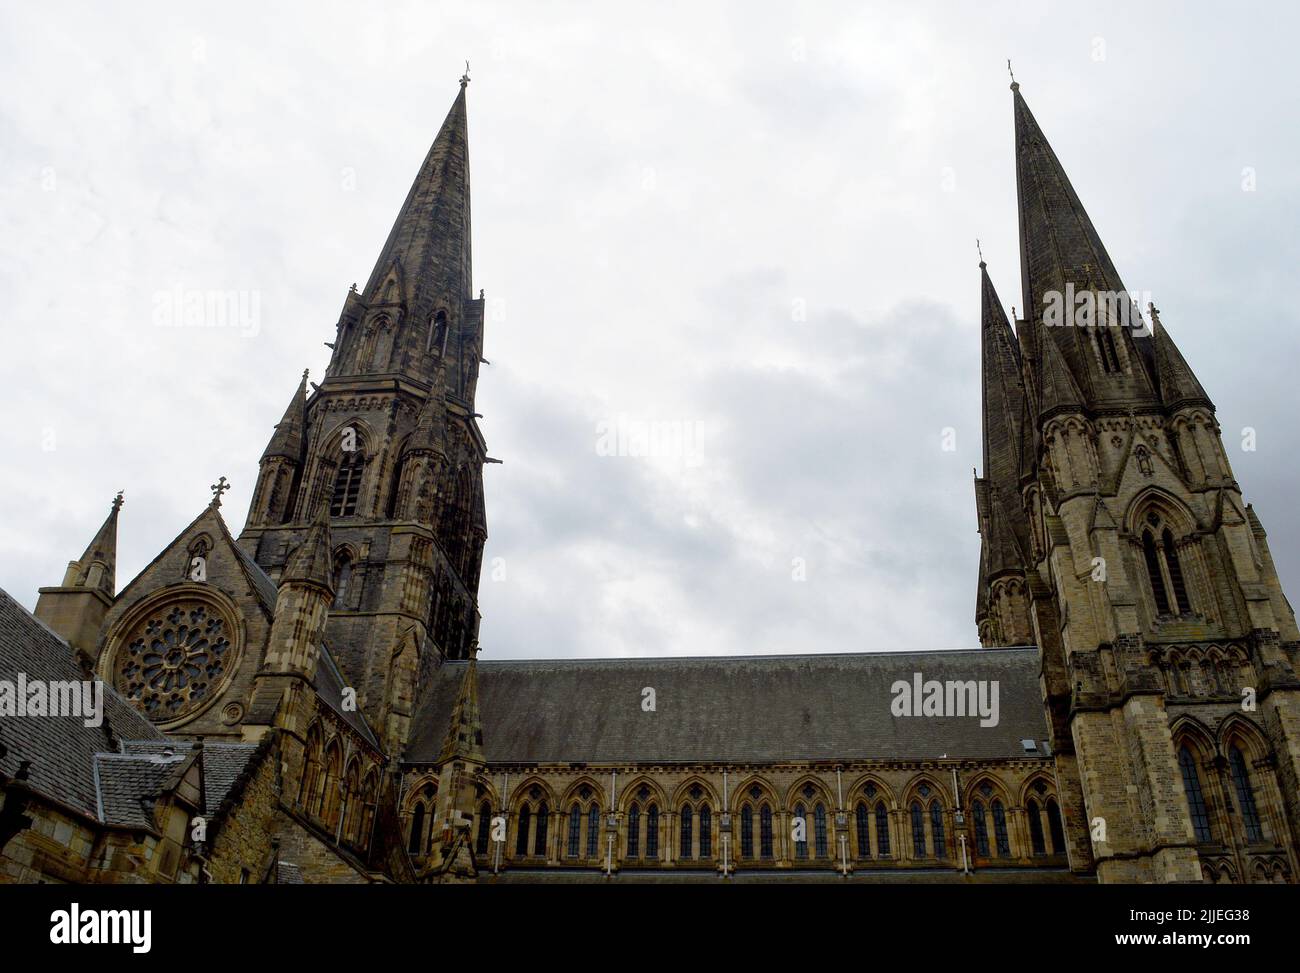 EDINBURGH, SCOTLAND - 12 JULY 2022: All three spires of o St Mary's Episcopal Cathedral, or the Church of St Mary the Virgin. Stock Photo